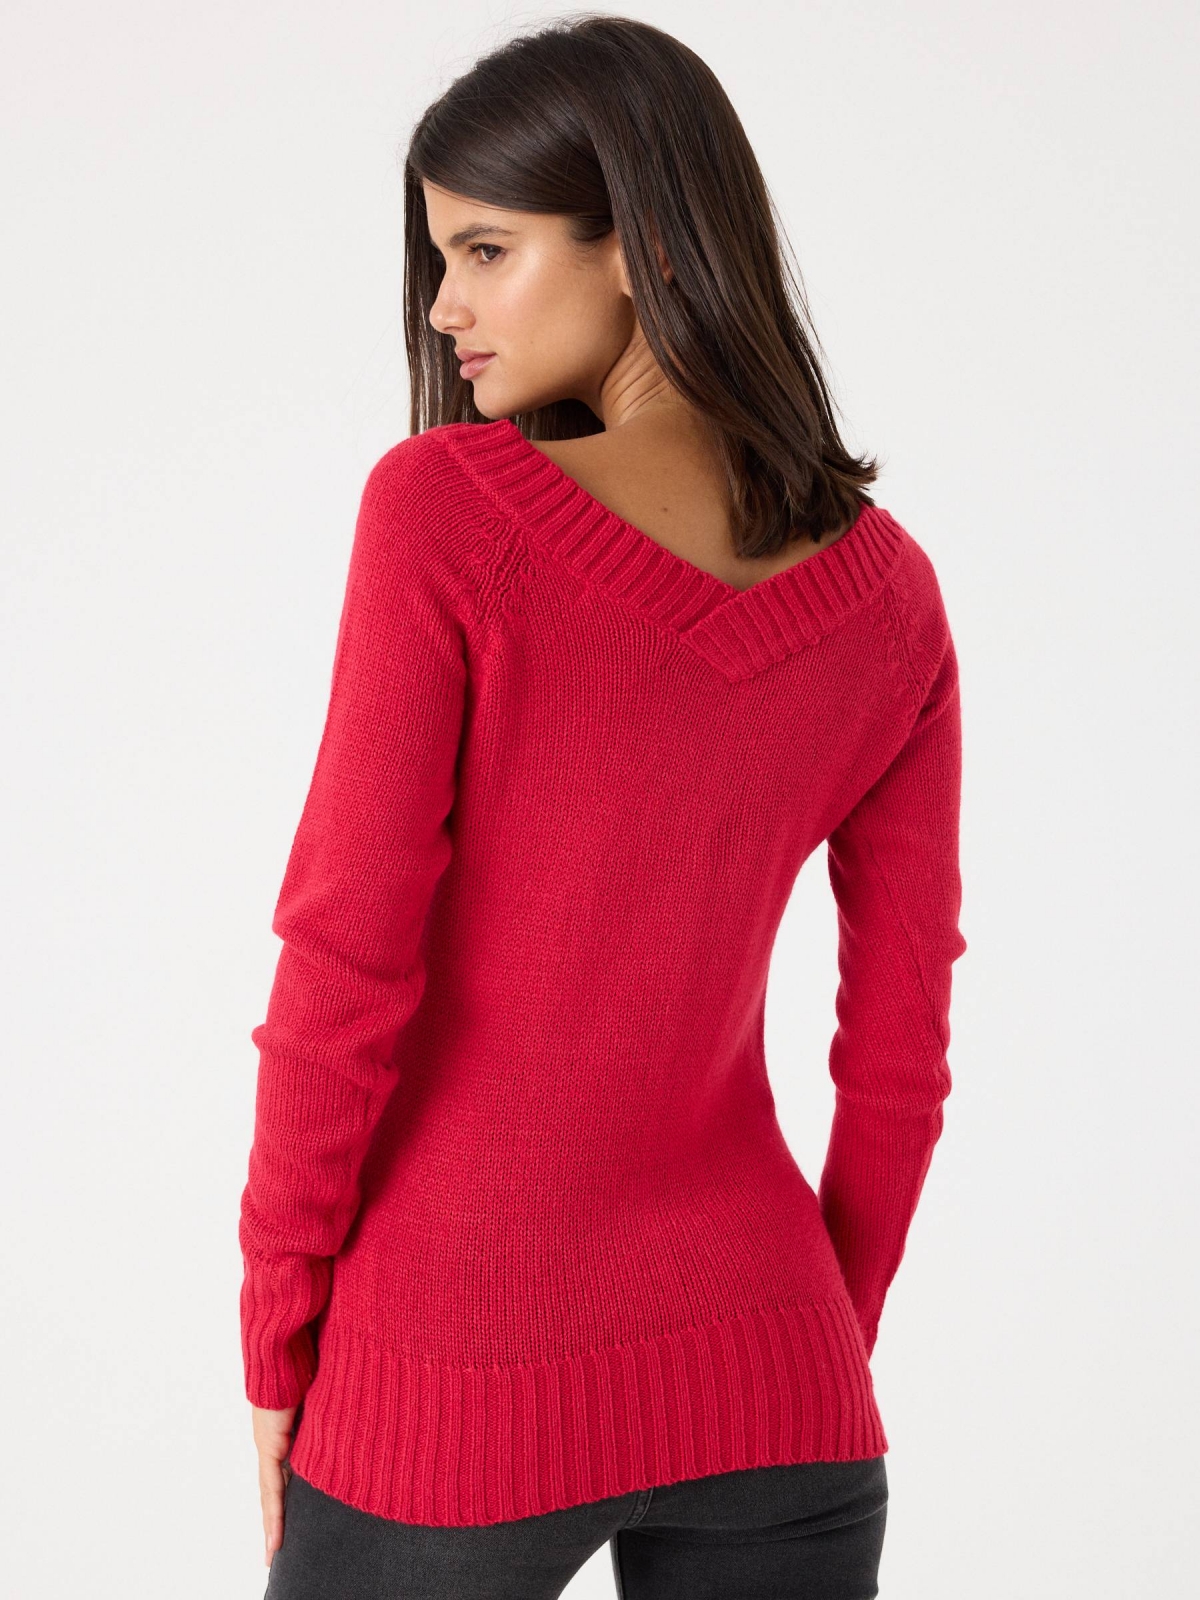 V-neck knit sweater red middle back view